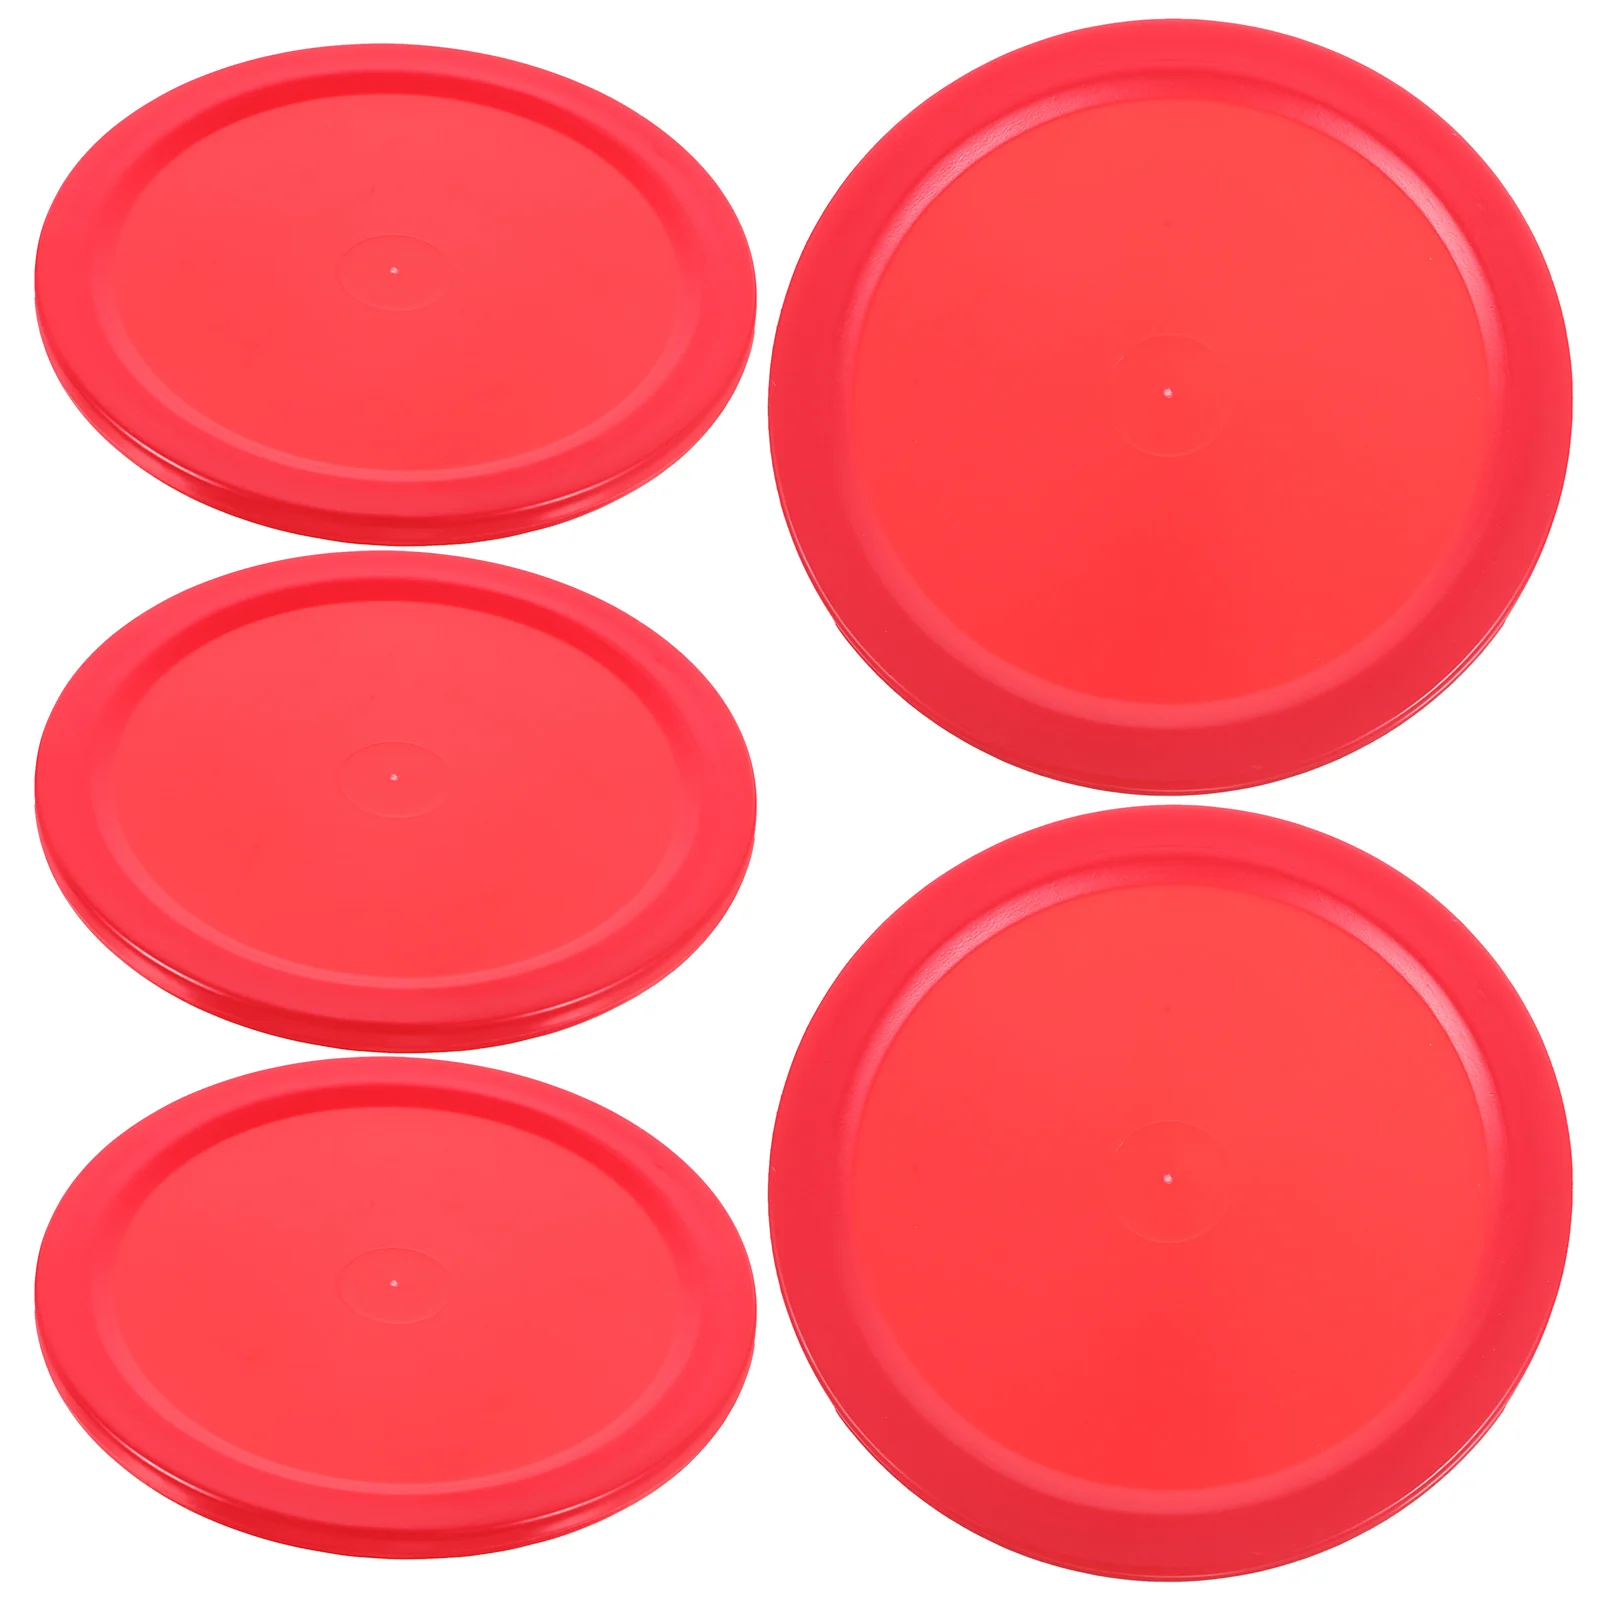 5 Pcs Air Hockey Games Supplies Indoor Pucks Replacement Round Mini Accessories Ice